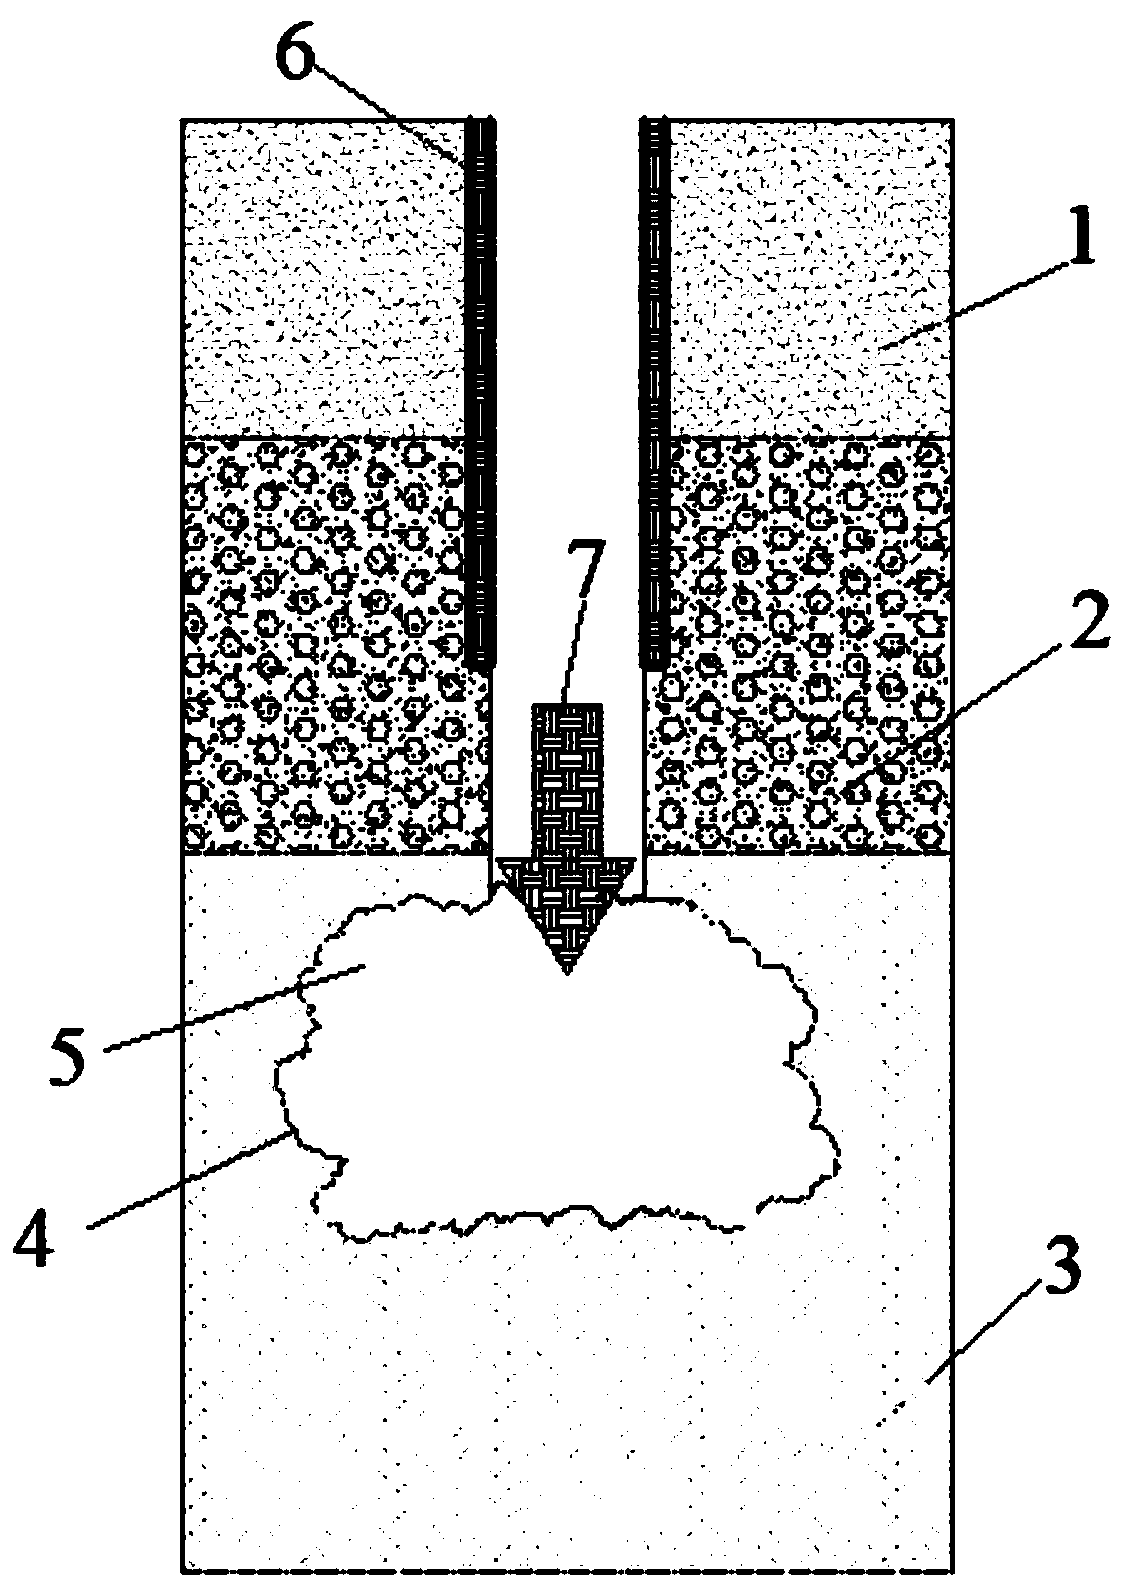 Construction method for increasing one-time qualification rate of pile foundation in karst or broken zone area